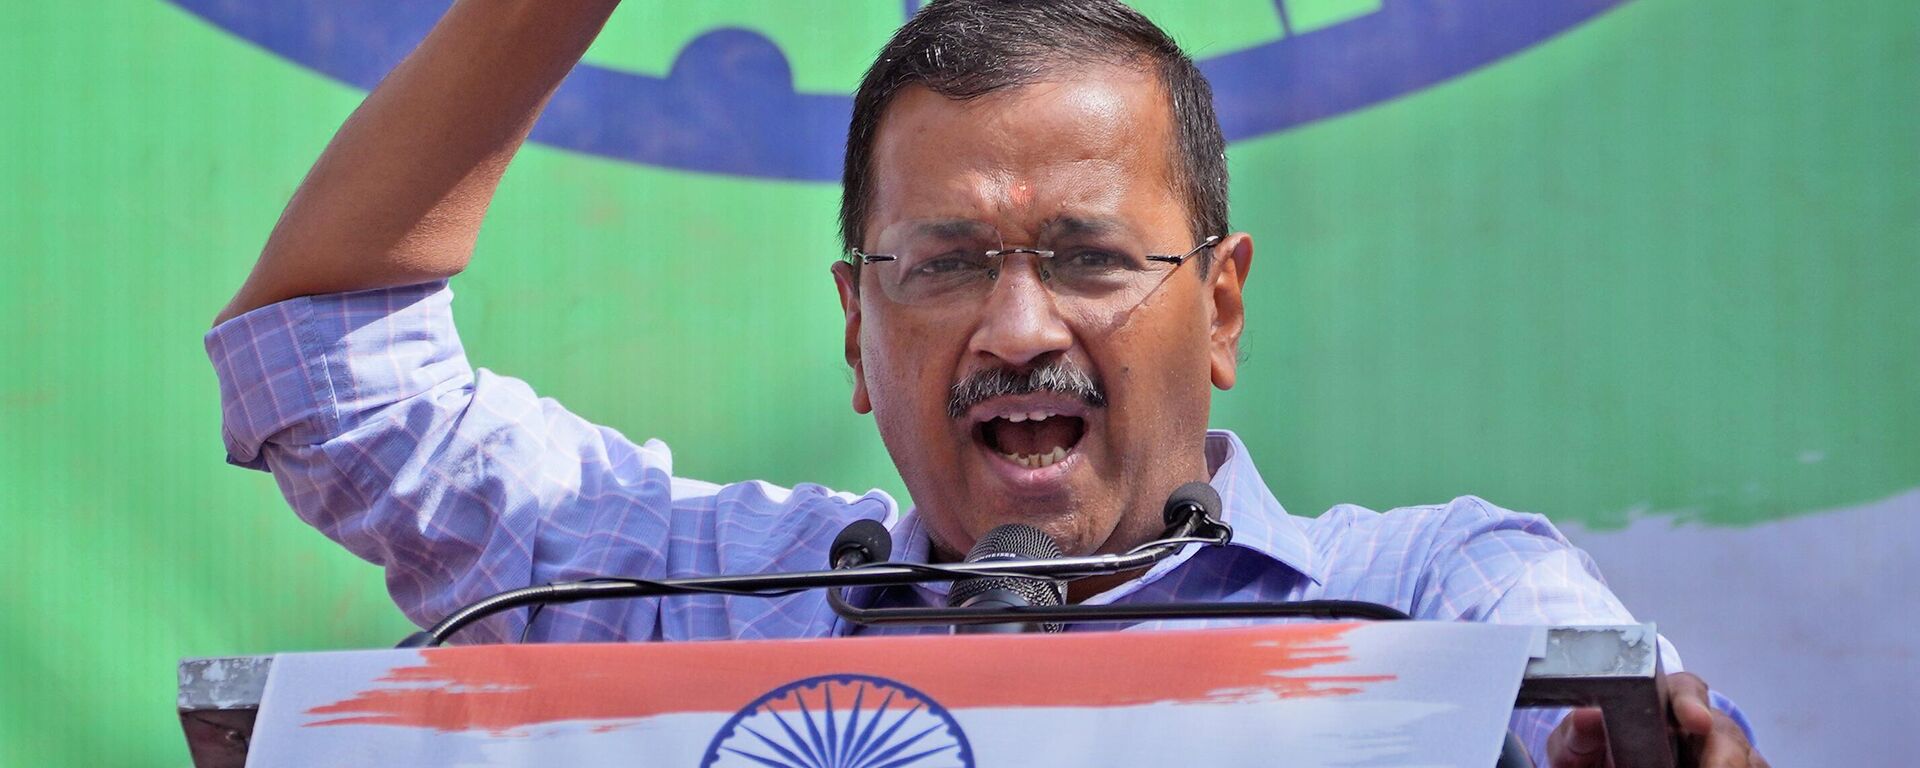 Delhi state Chief minister and chief of Aam Aadmi Party Arvind Kejriwal speaks during celebrations at the party headquarters in New Delhi, Thursday, March 10, 2022 - Sputnik International, 1920, 20.09.2022